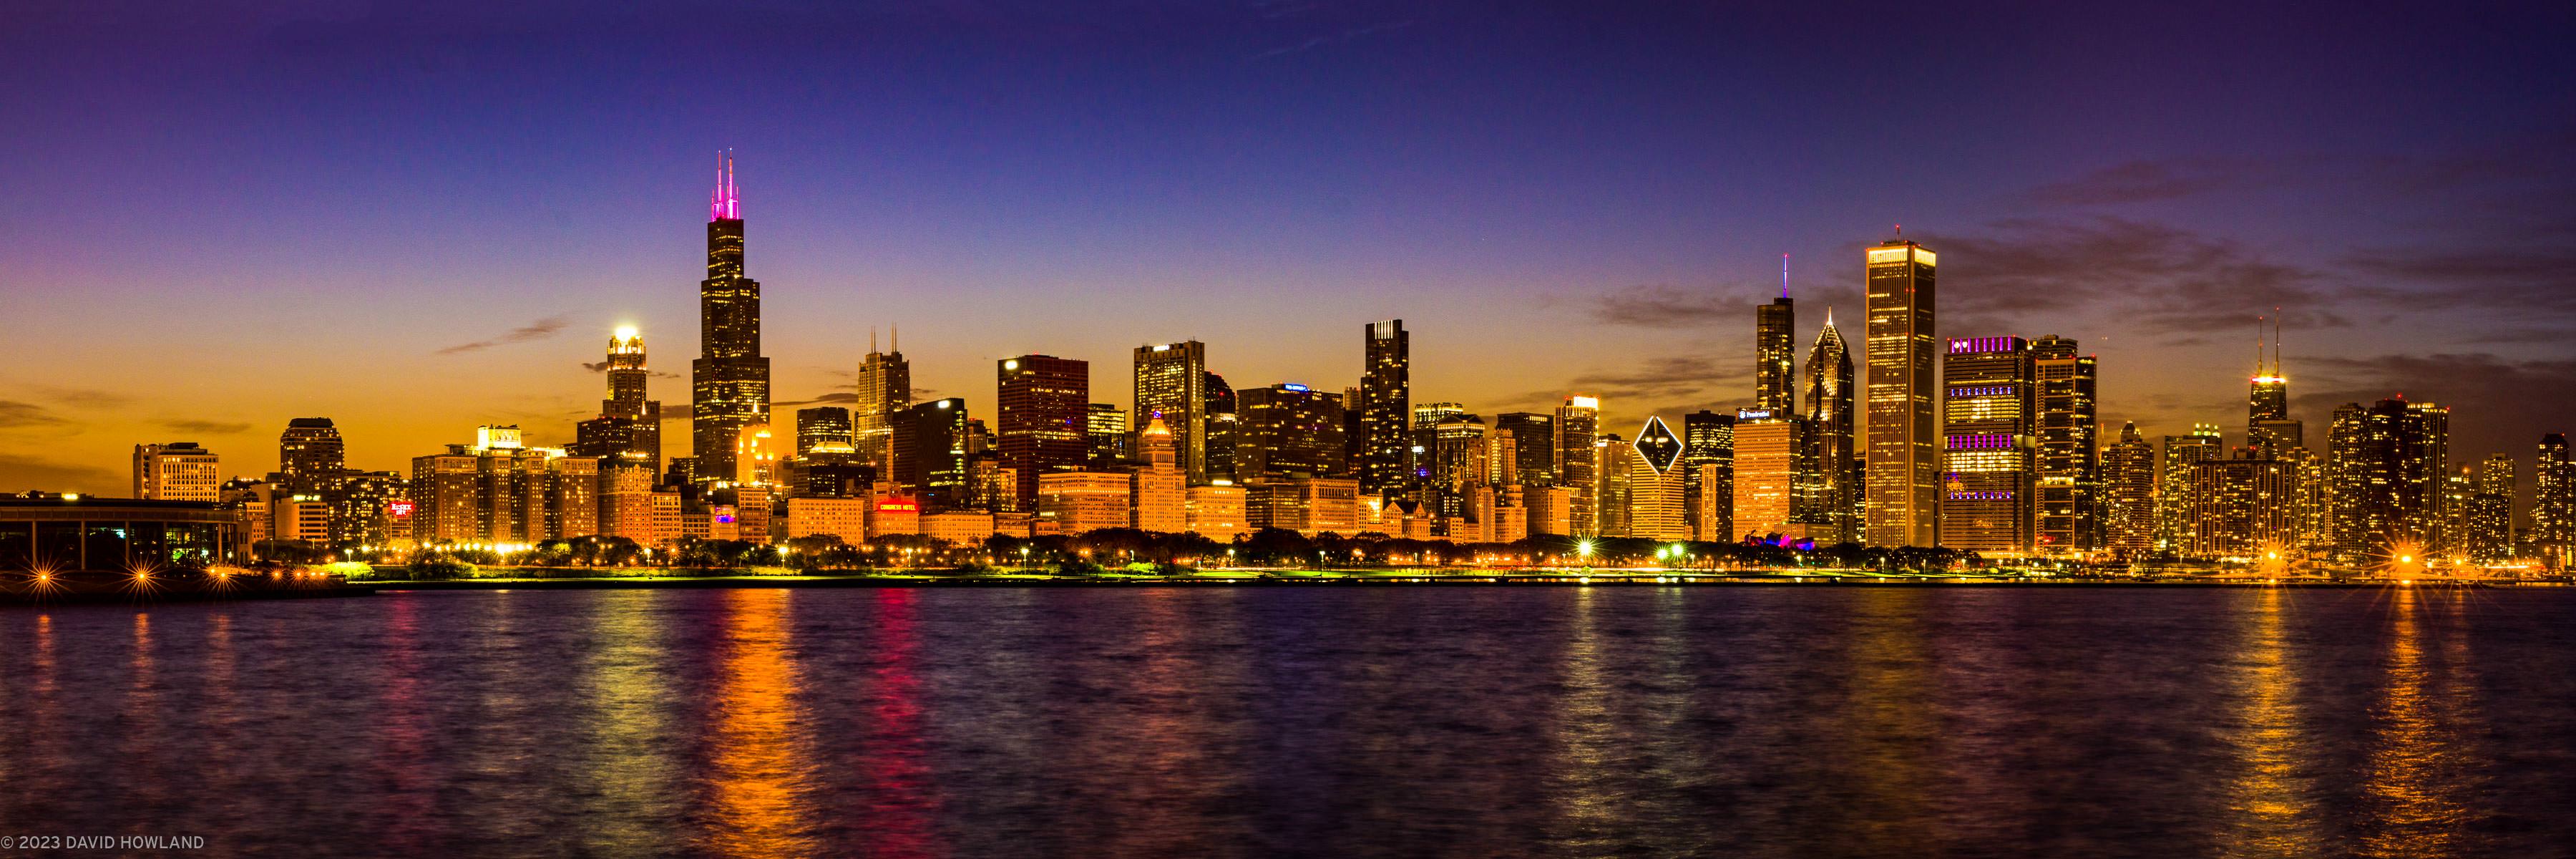 A panorama photo of the skyscrapers of the Chicago city skyline lit up against the fading orange sunset light.